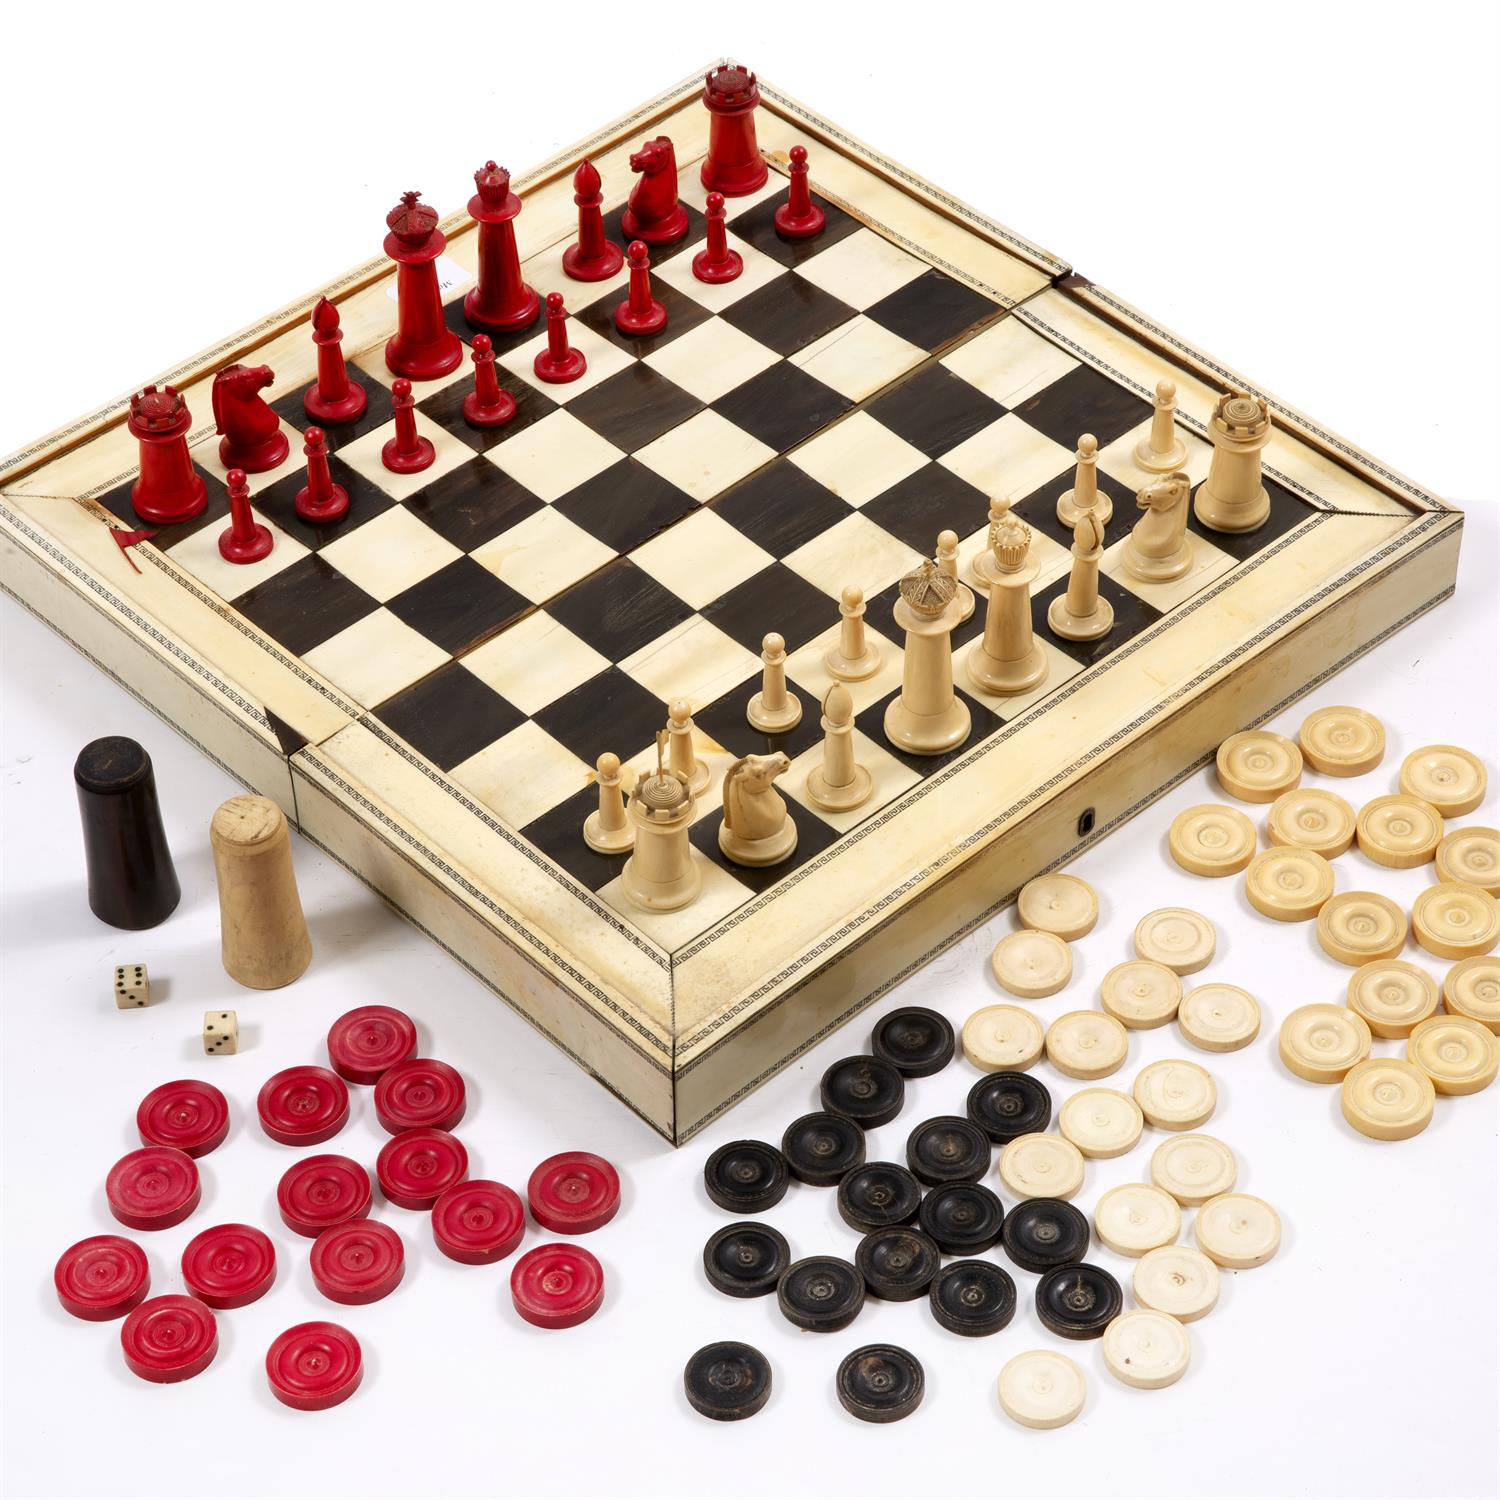 96 - A 19TH CENTURY VIZAGAPATAM ANGLO INDIAN IVORY AND EBONY CHESS